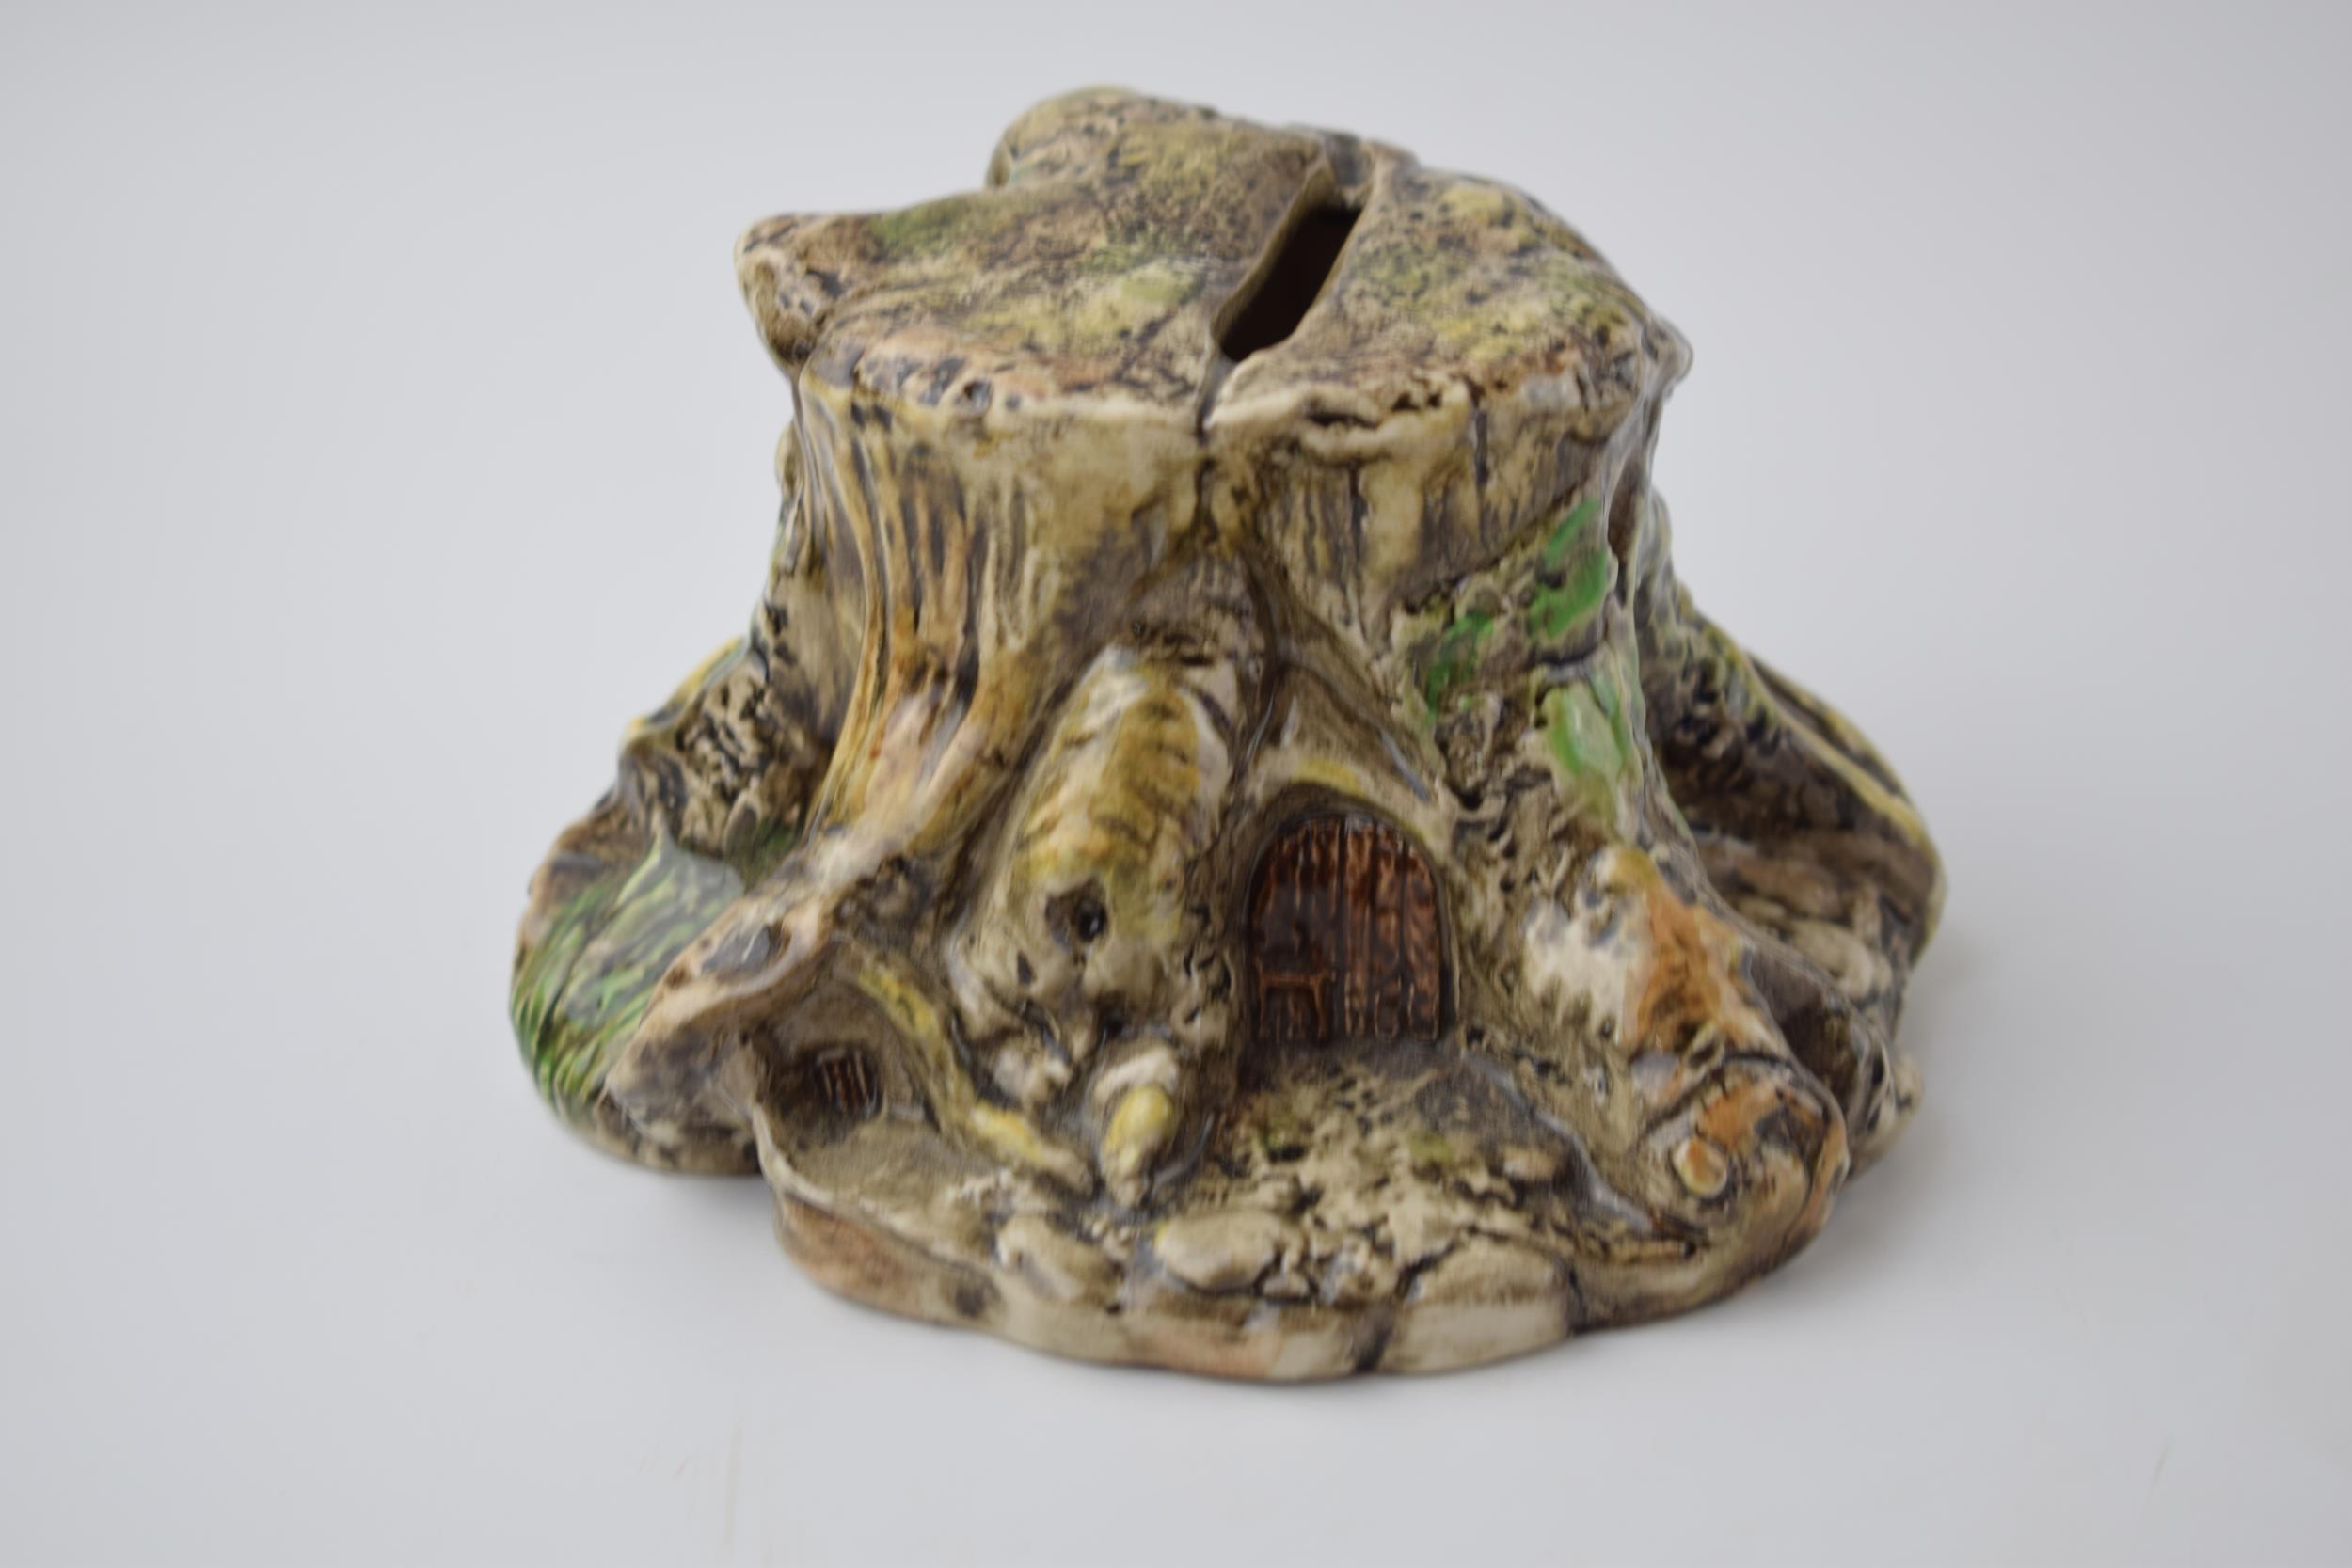 Royal Doulton Brambly Hedge tree store stump money box DBH18. In good condition with no obvious